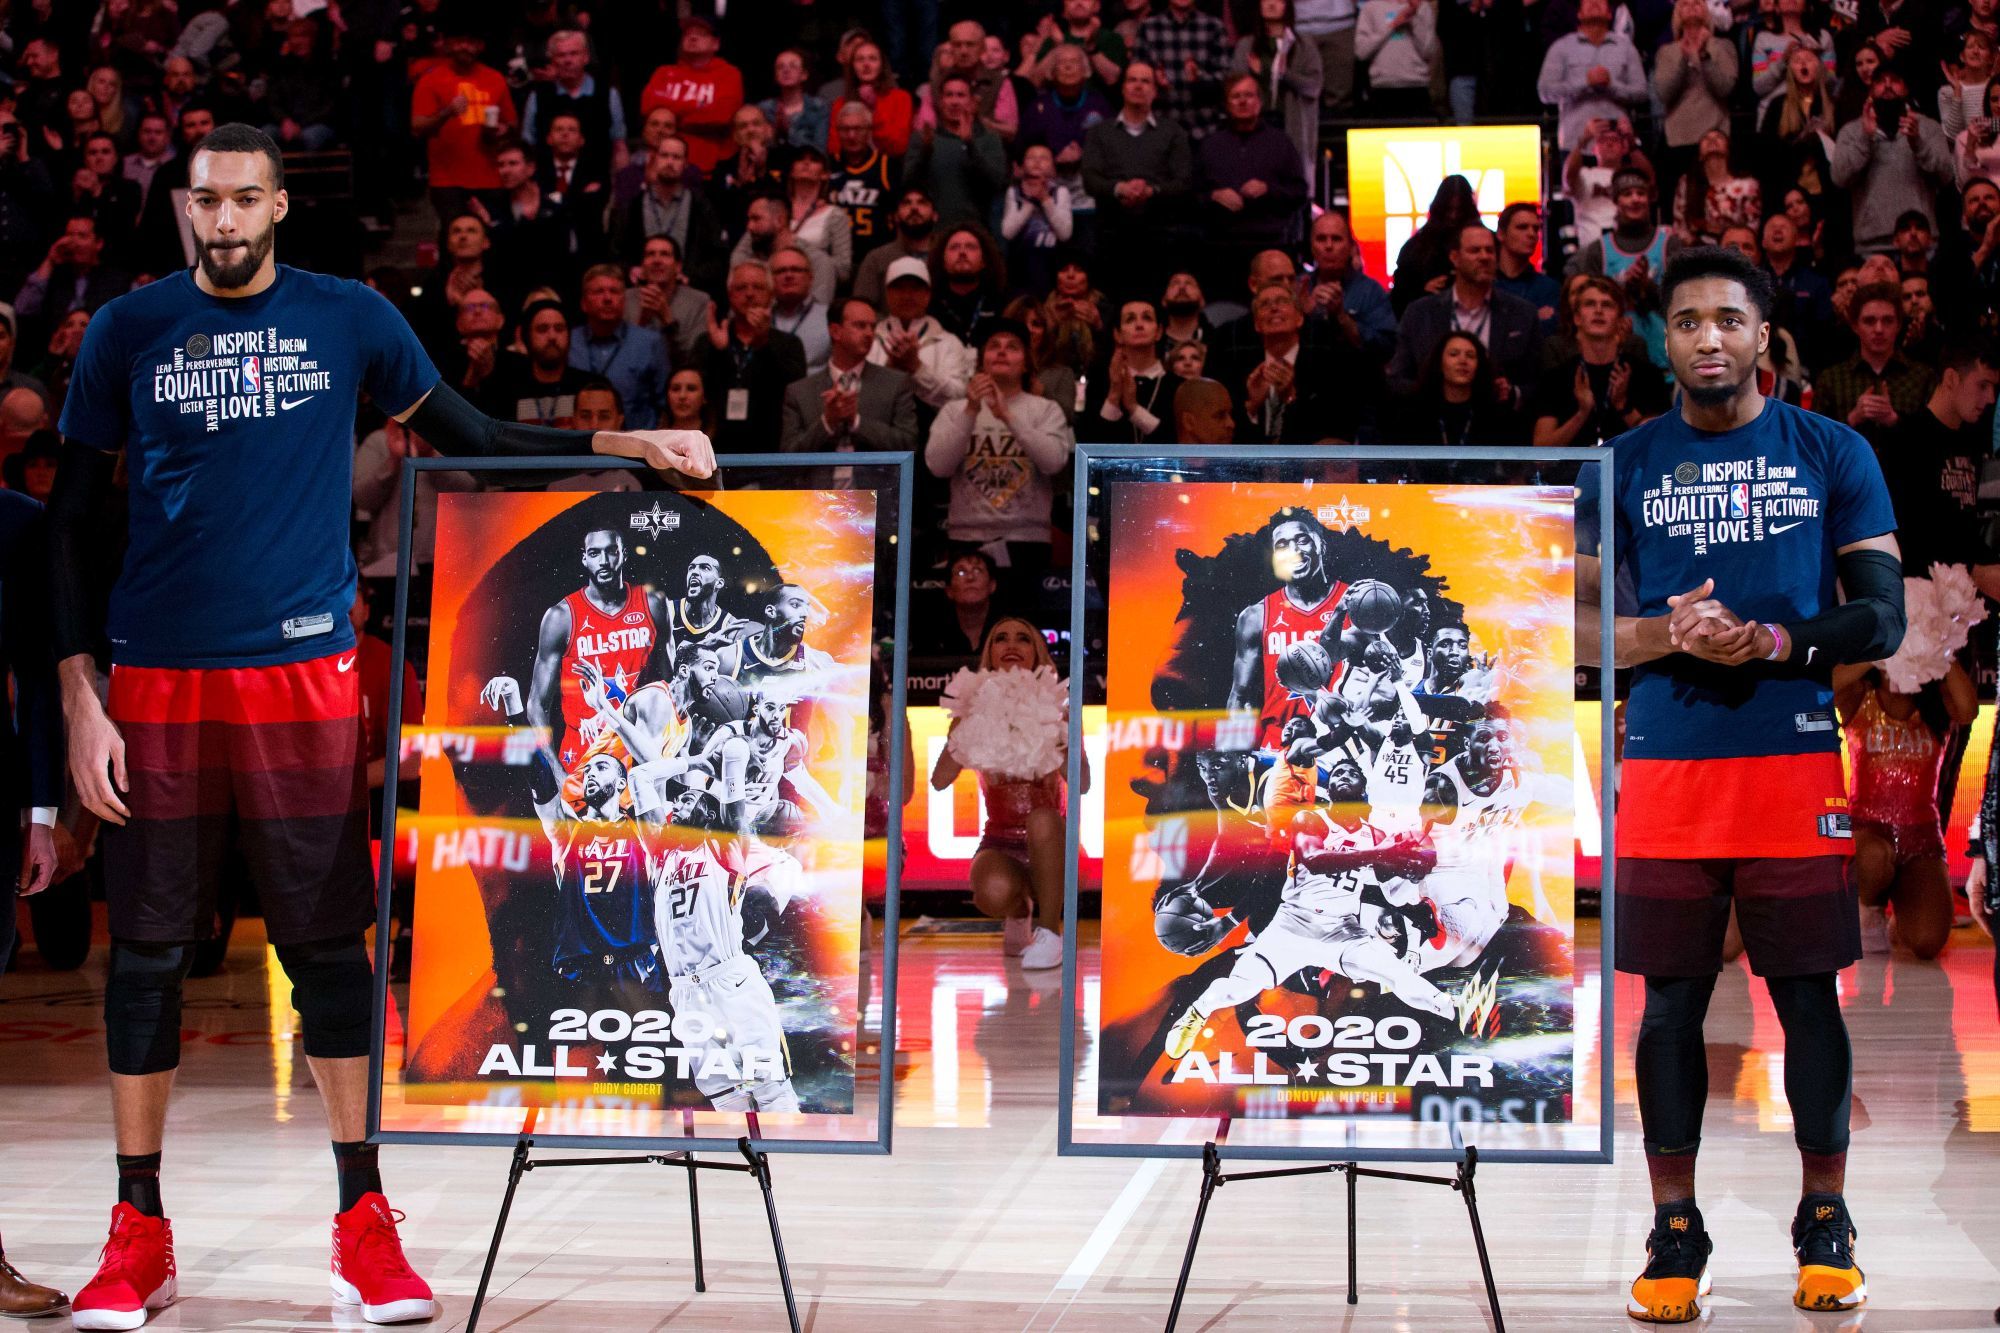 Feb 12, 2020; Salt Lake City, Utah, USA; Utah Jazz center Rudy Gobert (left) and guard Donovan Mitchell (right) are recognized for their selection to the NBA All-Star team prior to a game against the Miami Heat at Vivint Smart Home Arena. Mandatory Credit: Russell Isabella-USA TODAY Sports/Sipa USA 

Photo by Icon Sport - Rudy GOBERT - Donovan MITCHELL - Vivant Smart Home Arena - Salt Lake City (Etats Unis)